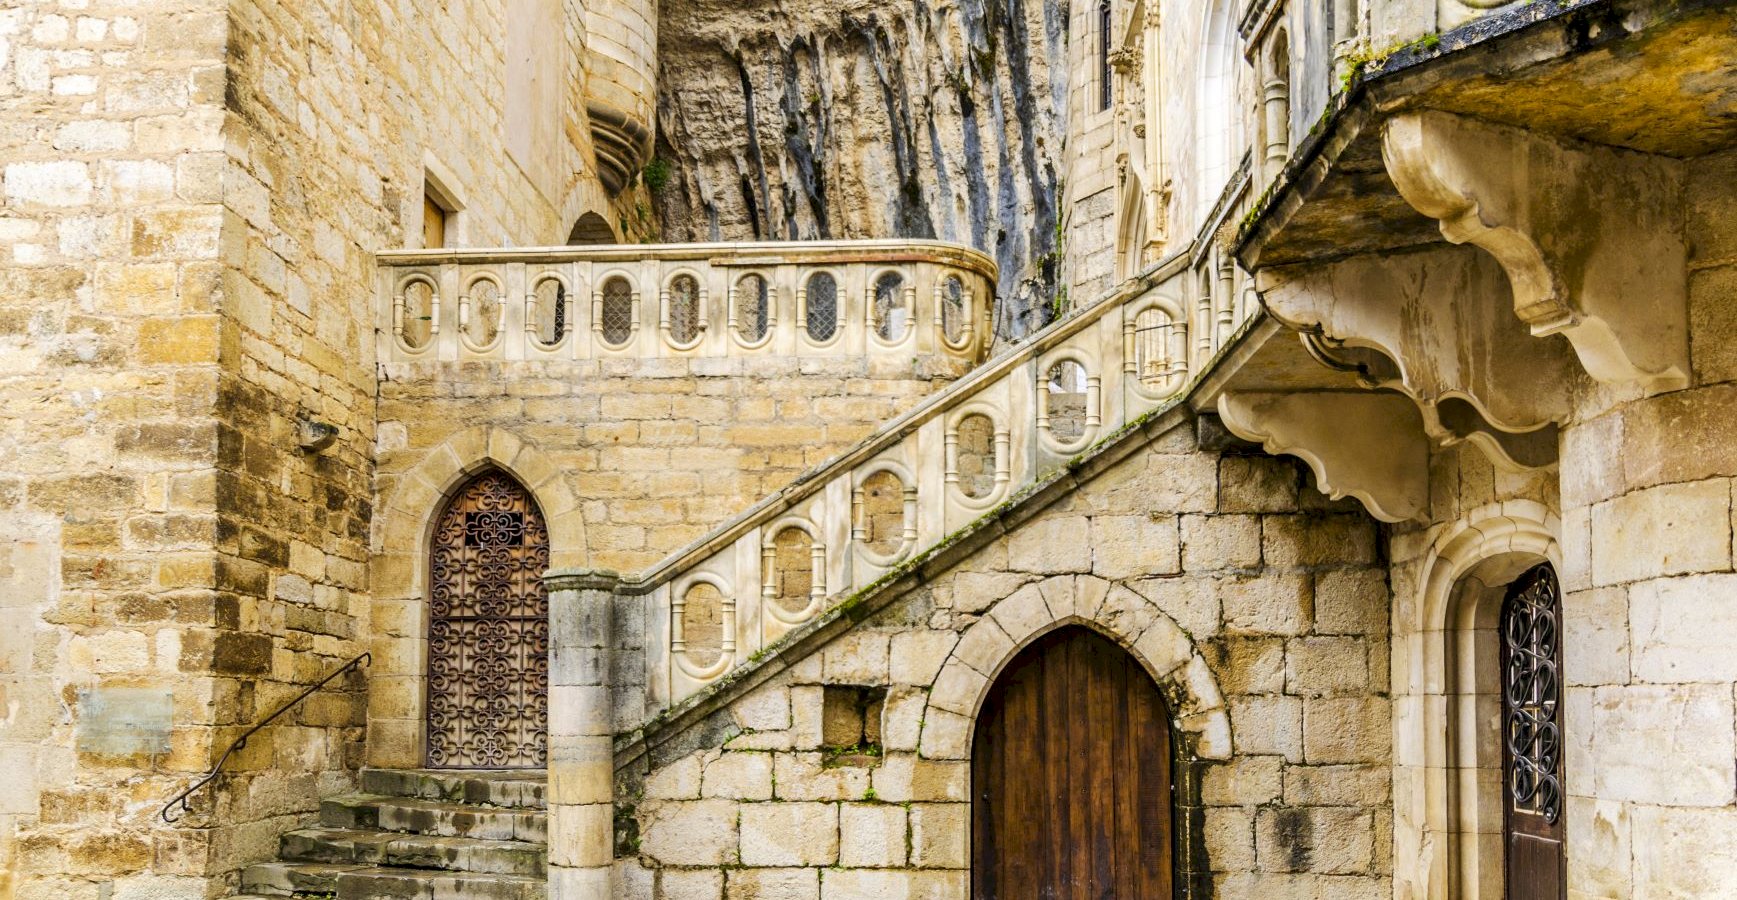 Ophorus Tours - A Private Half Day Trip From Sarlat to Rocamadour Village